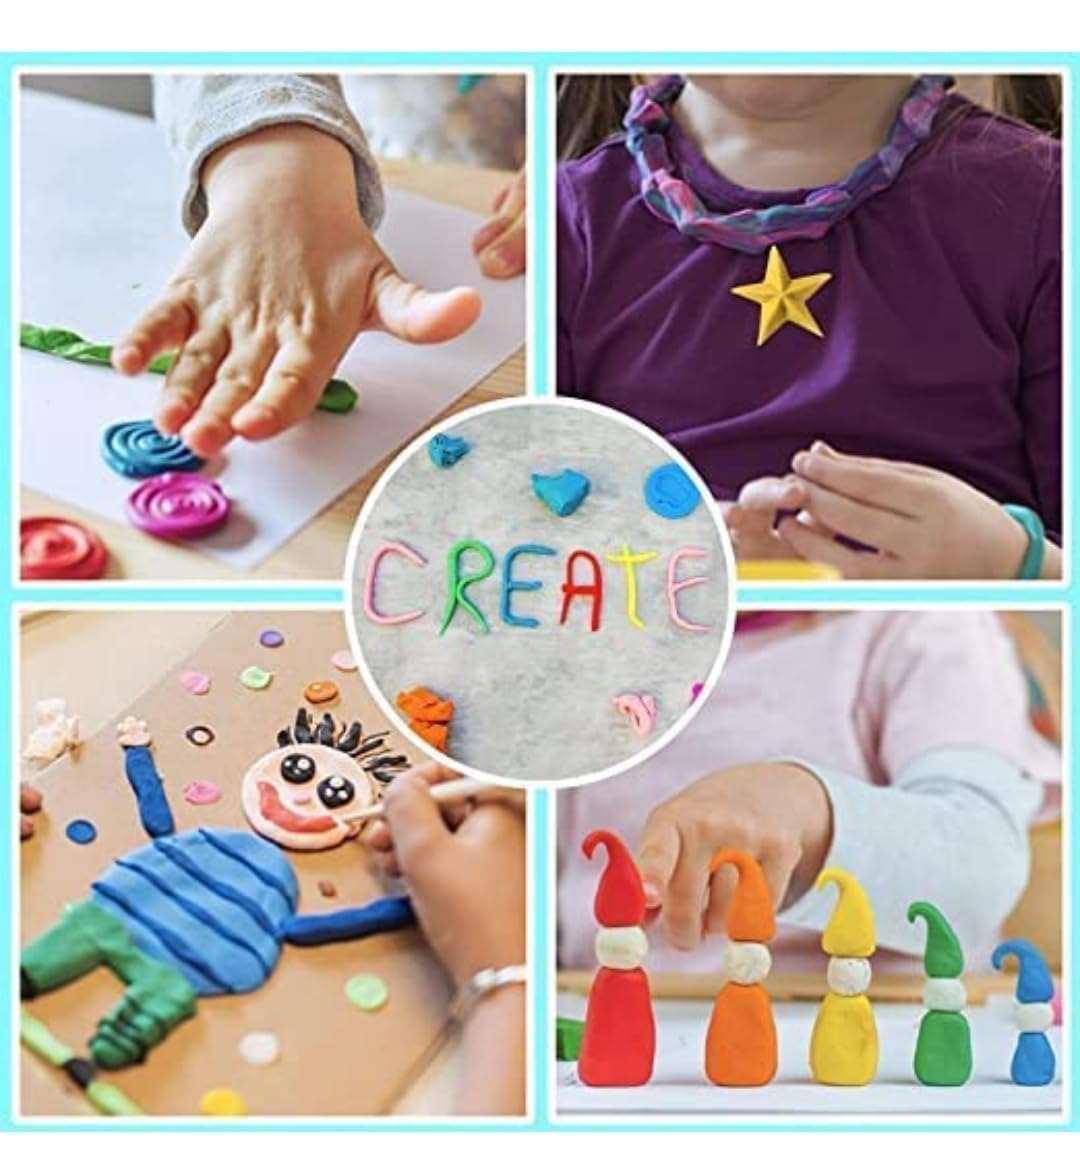 Haoser 12 Colors Air Dry Magic Clay, Ultra-Light Creative Art and Craft Air Dry Super Clay with Carving Molding Tools Kit for Kids (Pack of 1) Animal Decoration Accessories, Kids Art Crafts Best Gift - Haoser